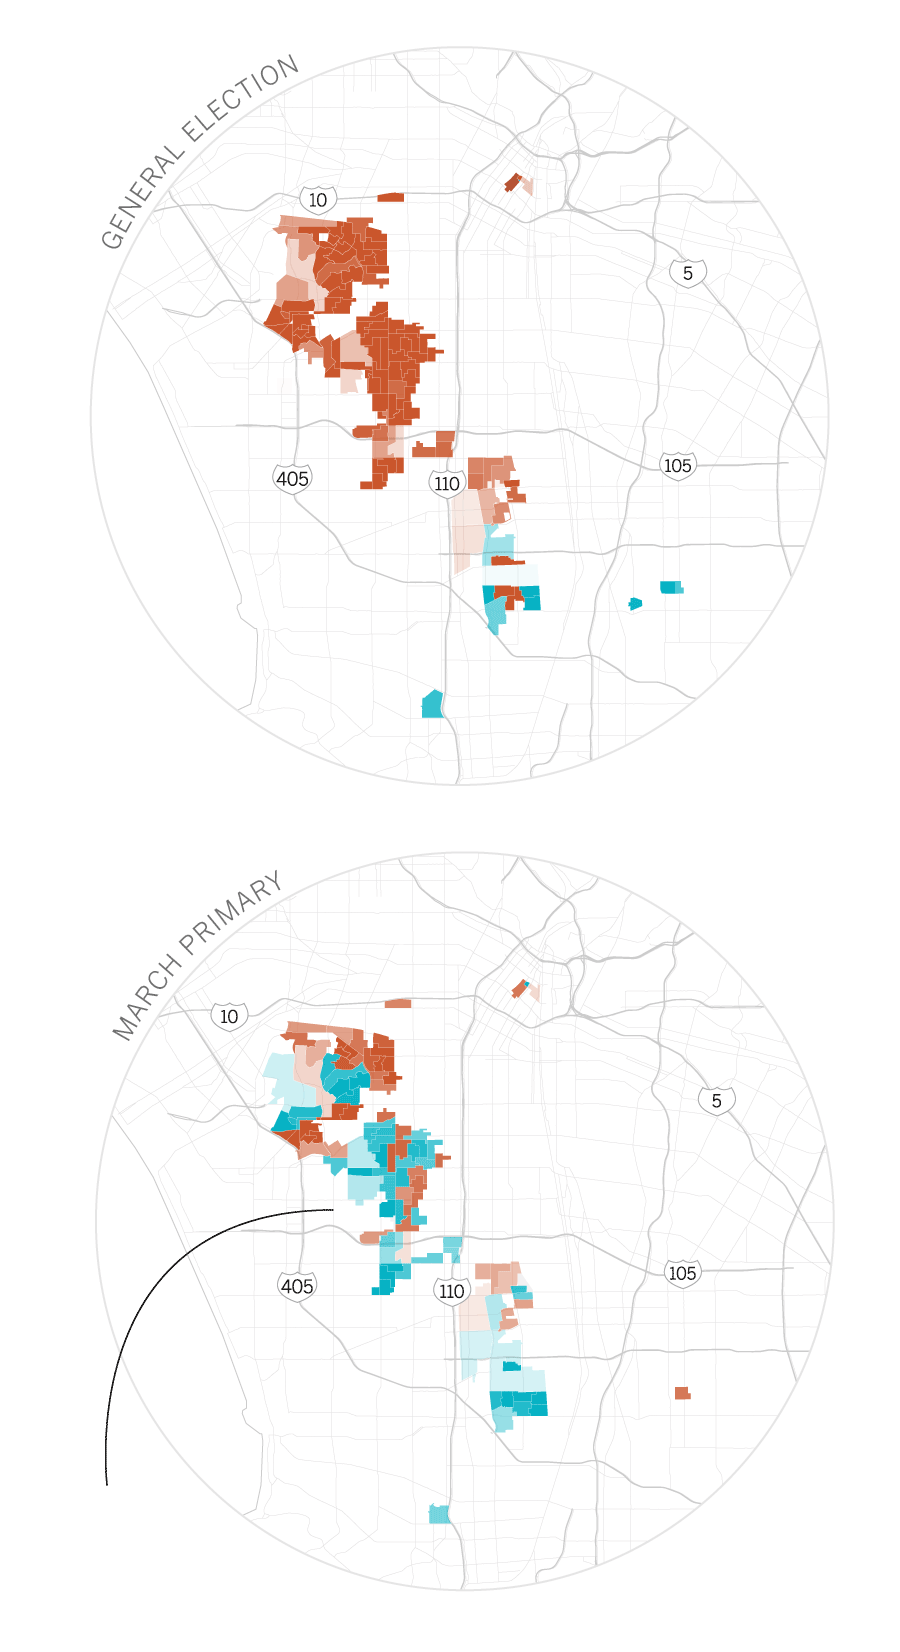 Maps comparing the plurality-black precincts won by Gascon in the primary vs. the general election.